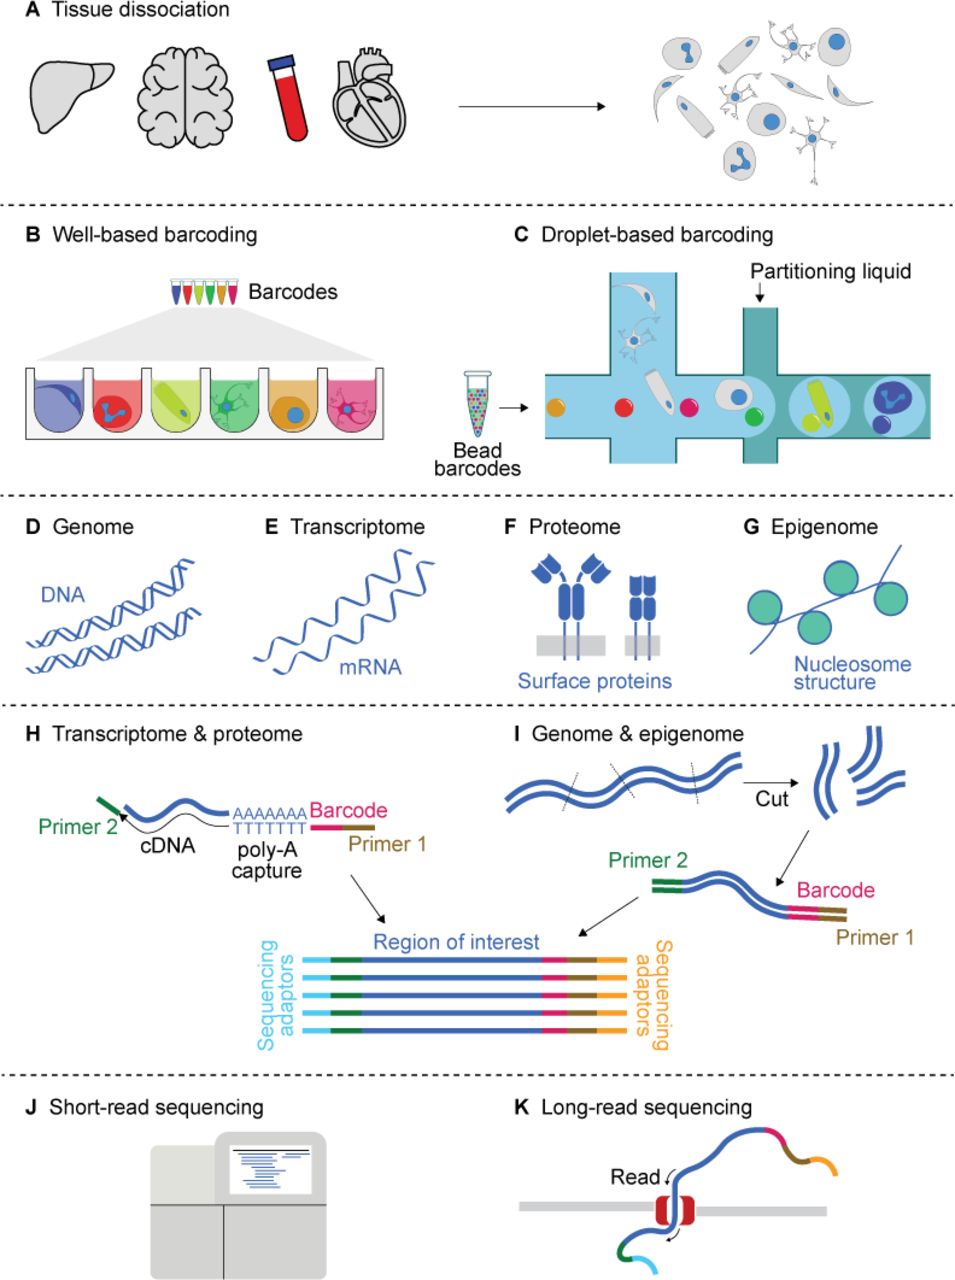 This image illustrates the concept of single-cell sequencing, where individual cells are isolated and their genetic material is analyzed separately